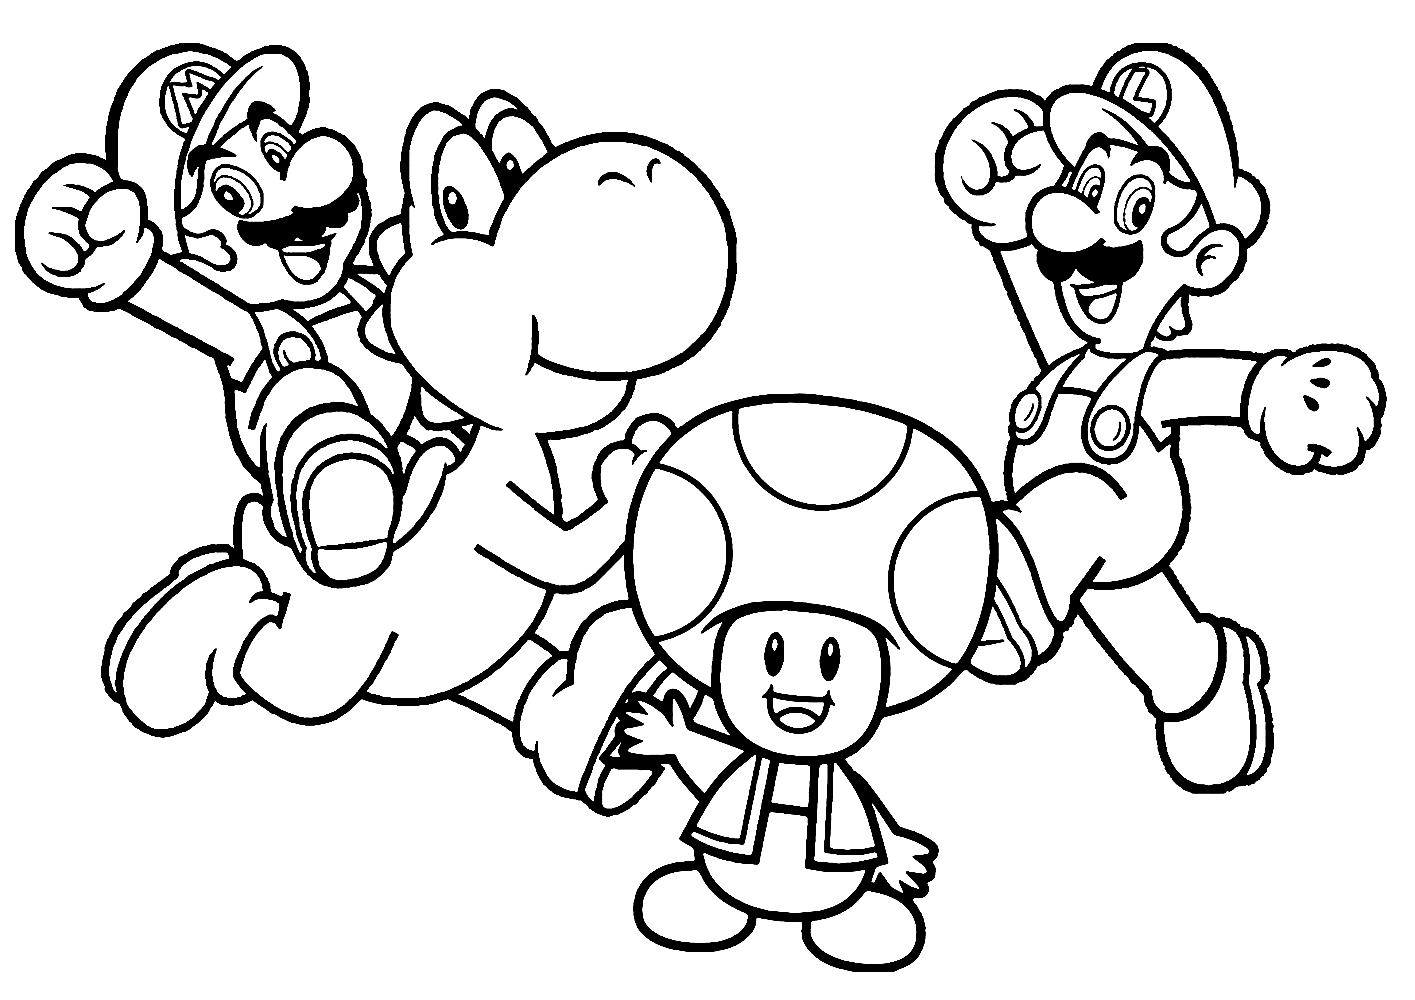 mario and luigi and yoshi coloring pages